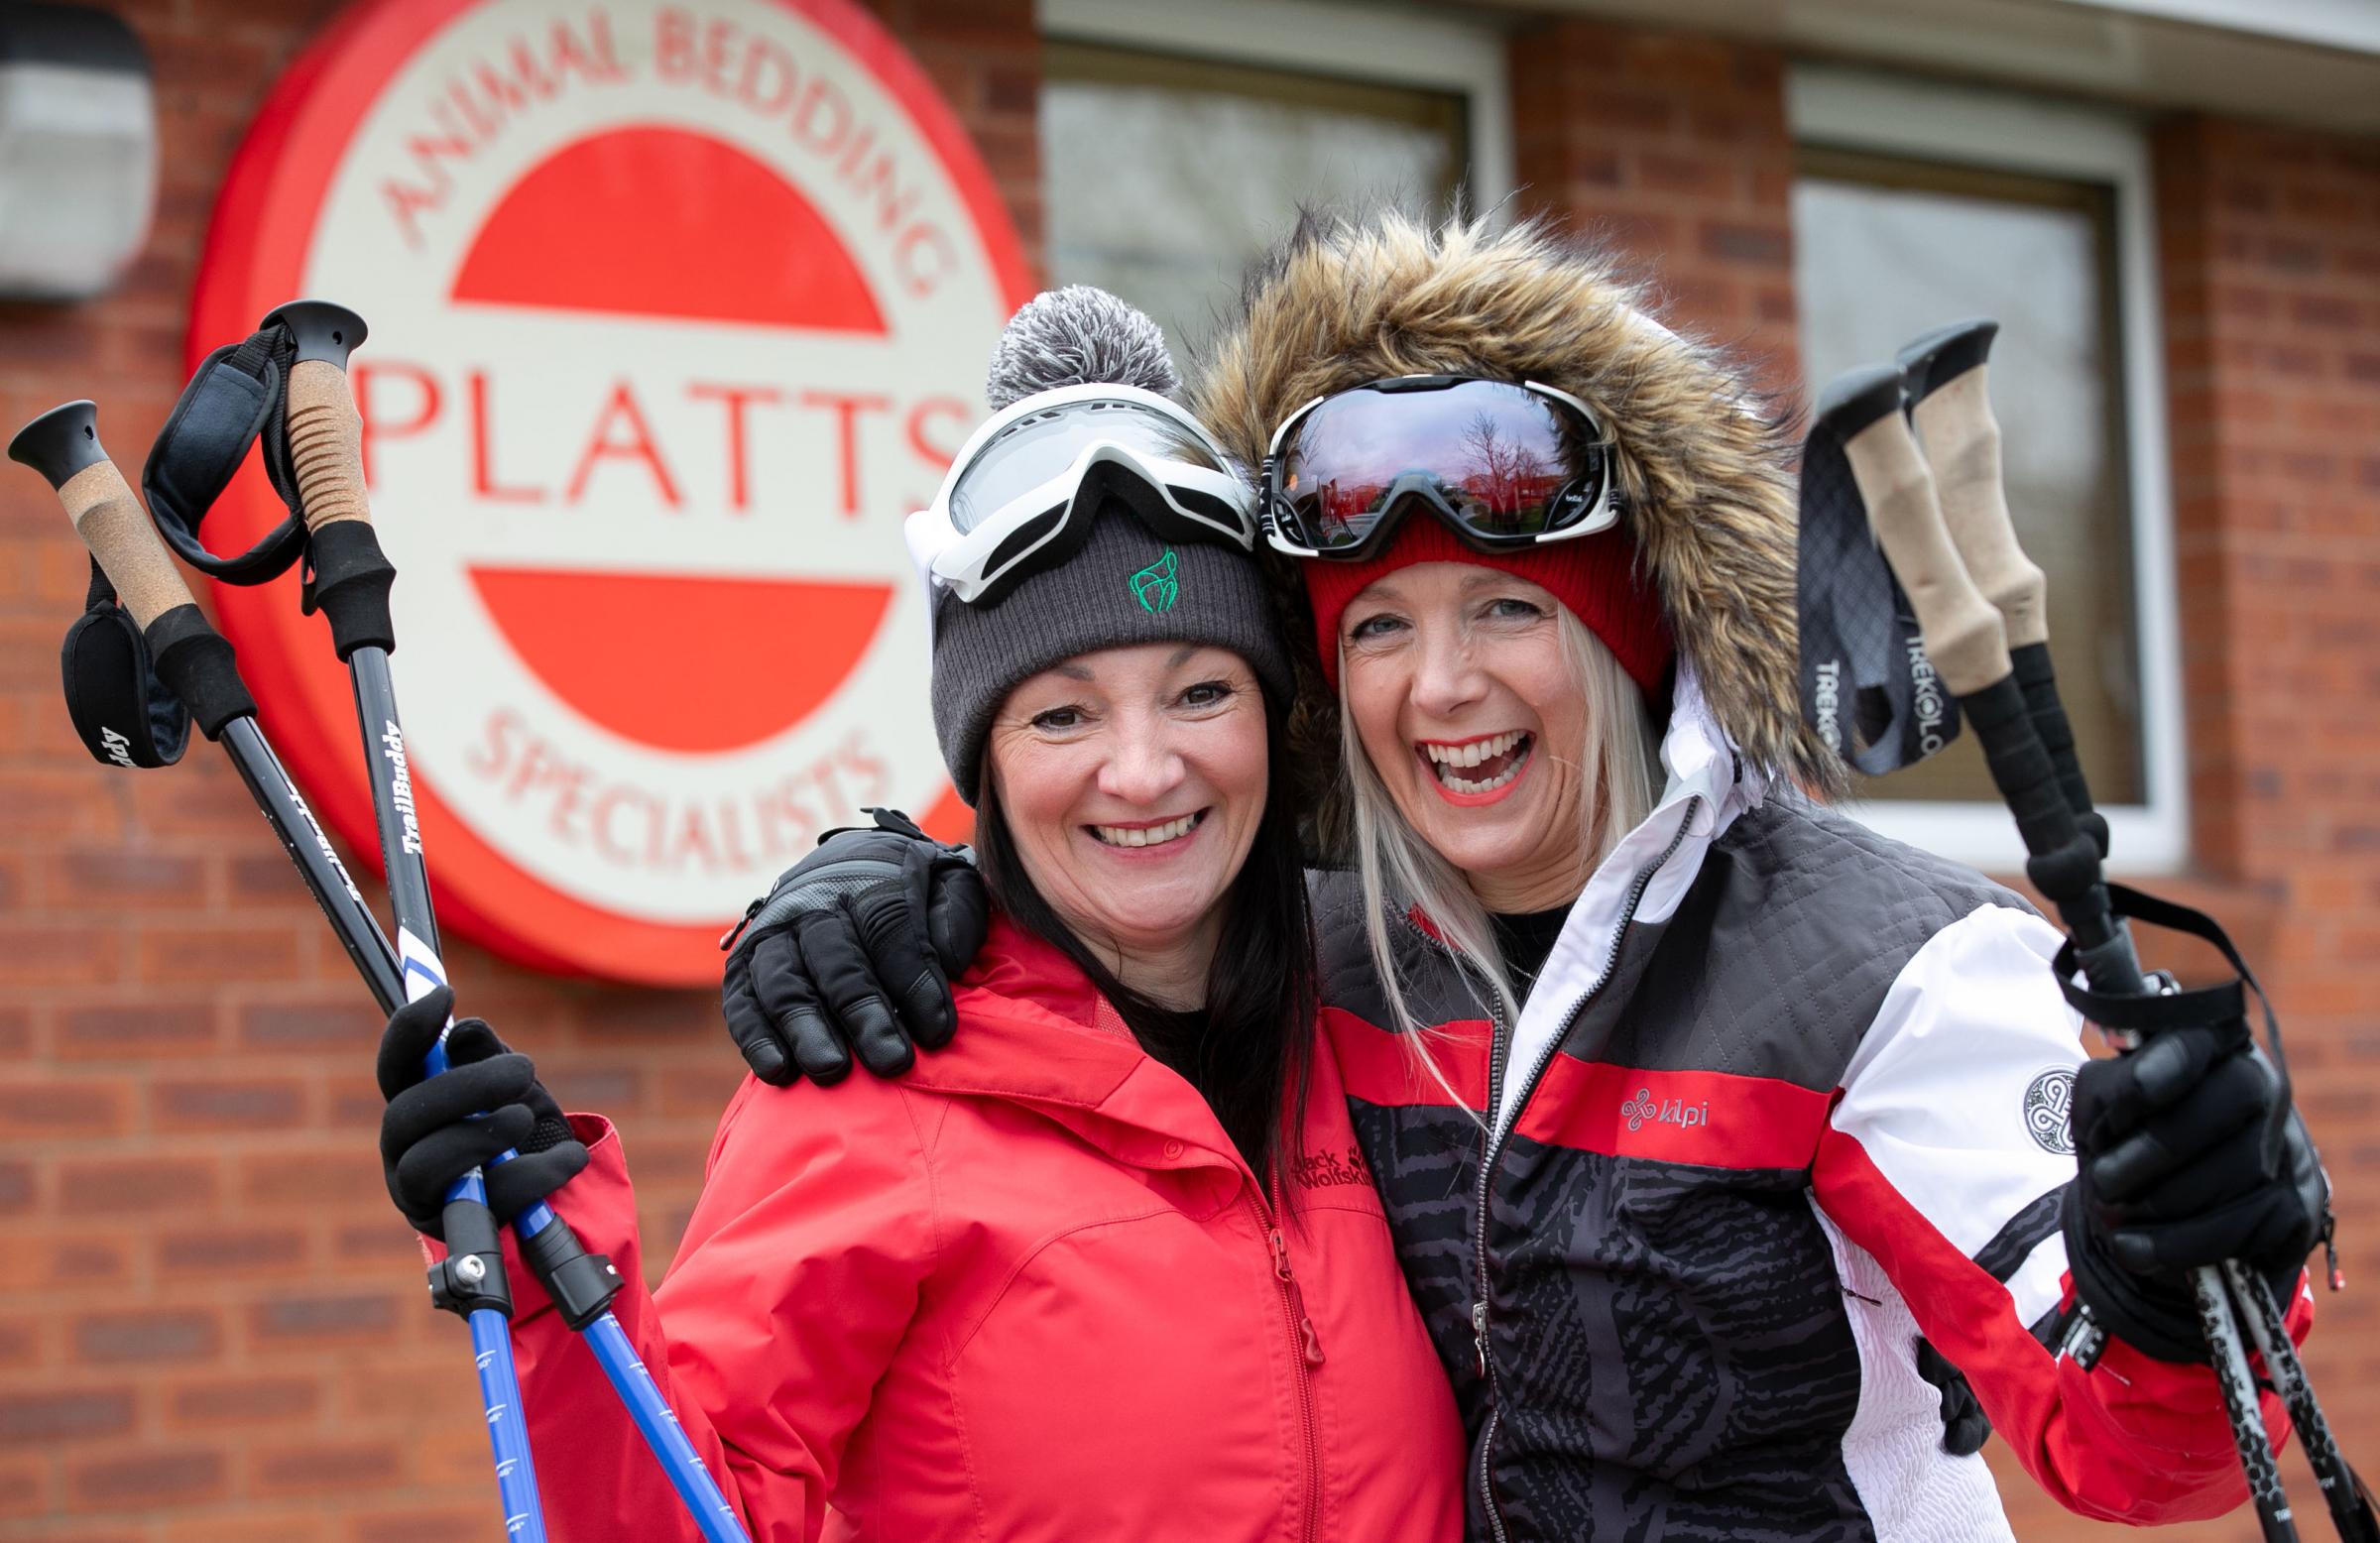 Caroline Platt (right) and her friend and colleague, Nerys Price-Jones, are taking on the Arctic Challenge for The Joshua Tree charity.